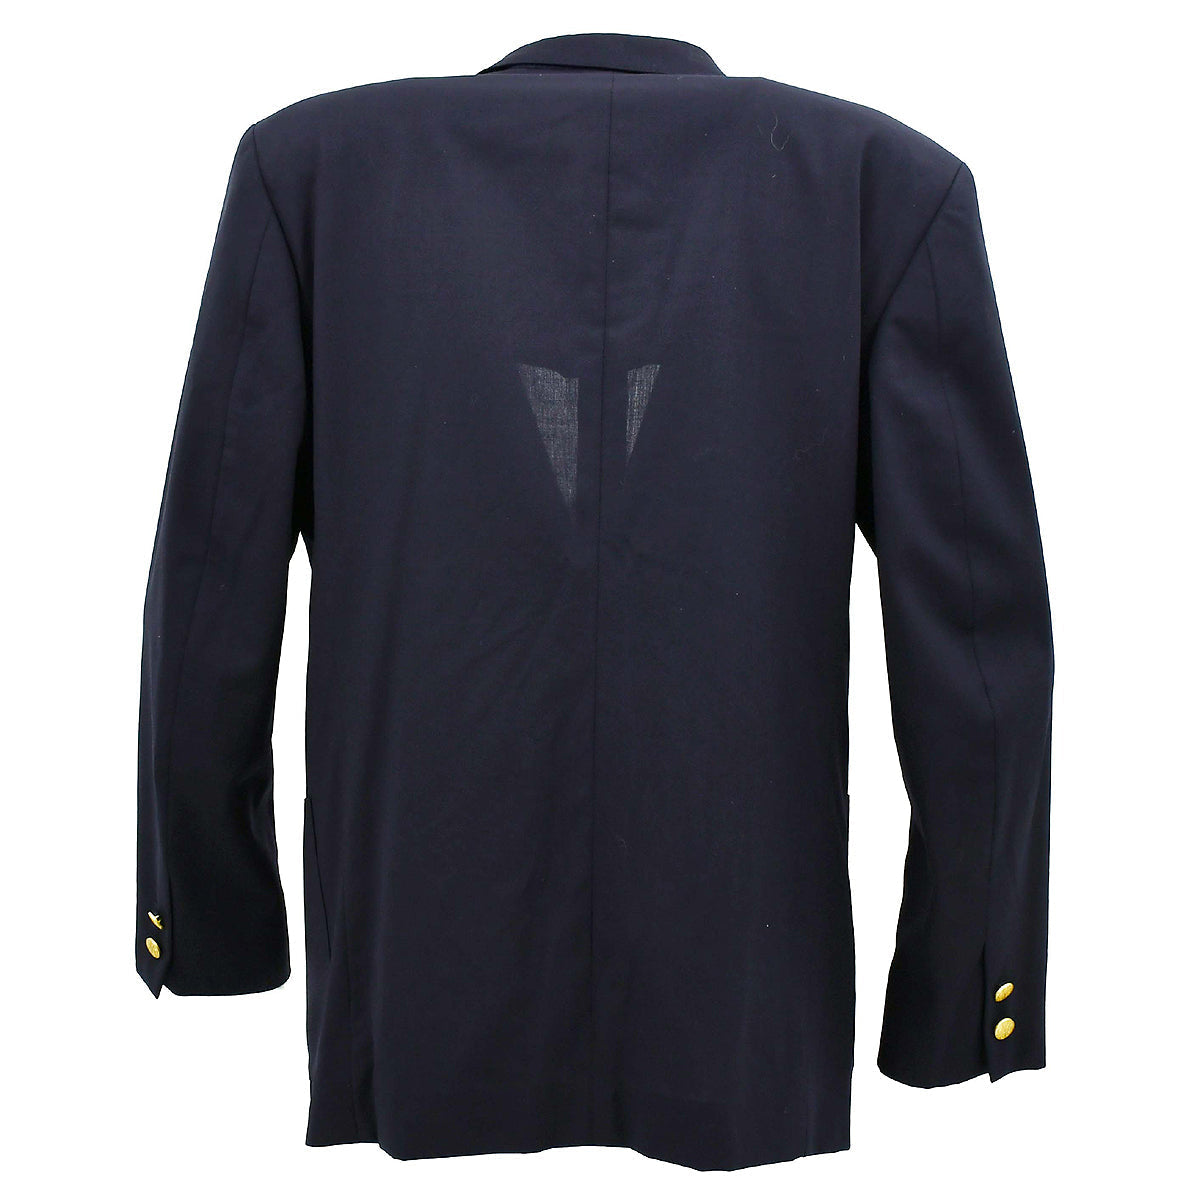 Christian Dior Single Breasted Jacket Navy 